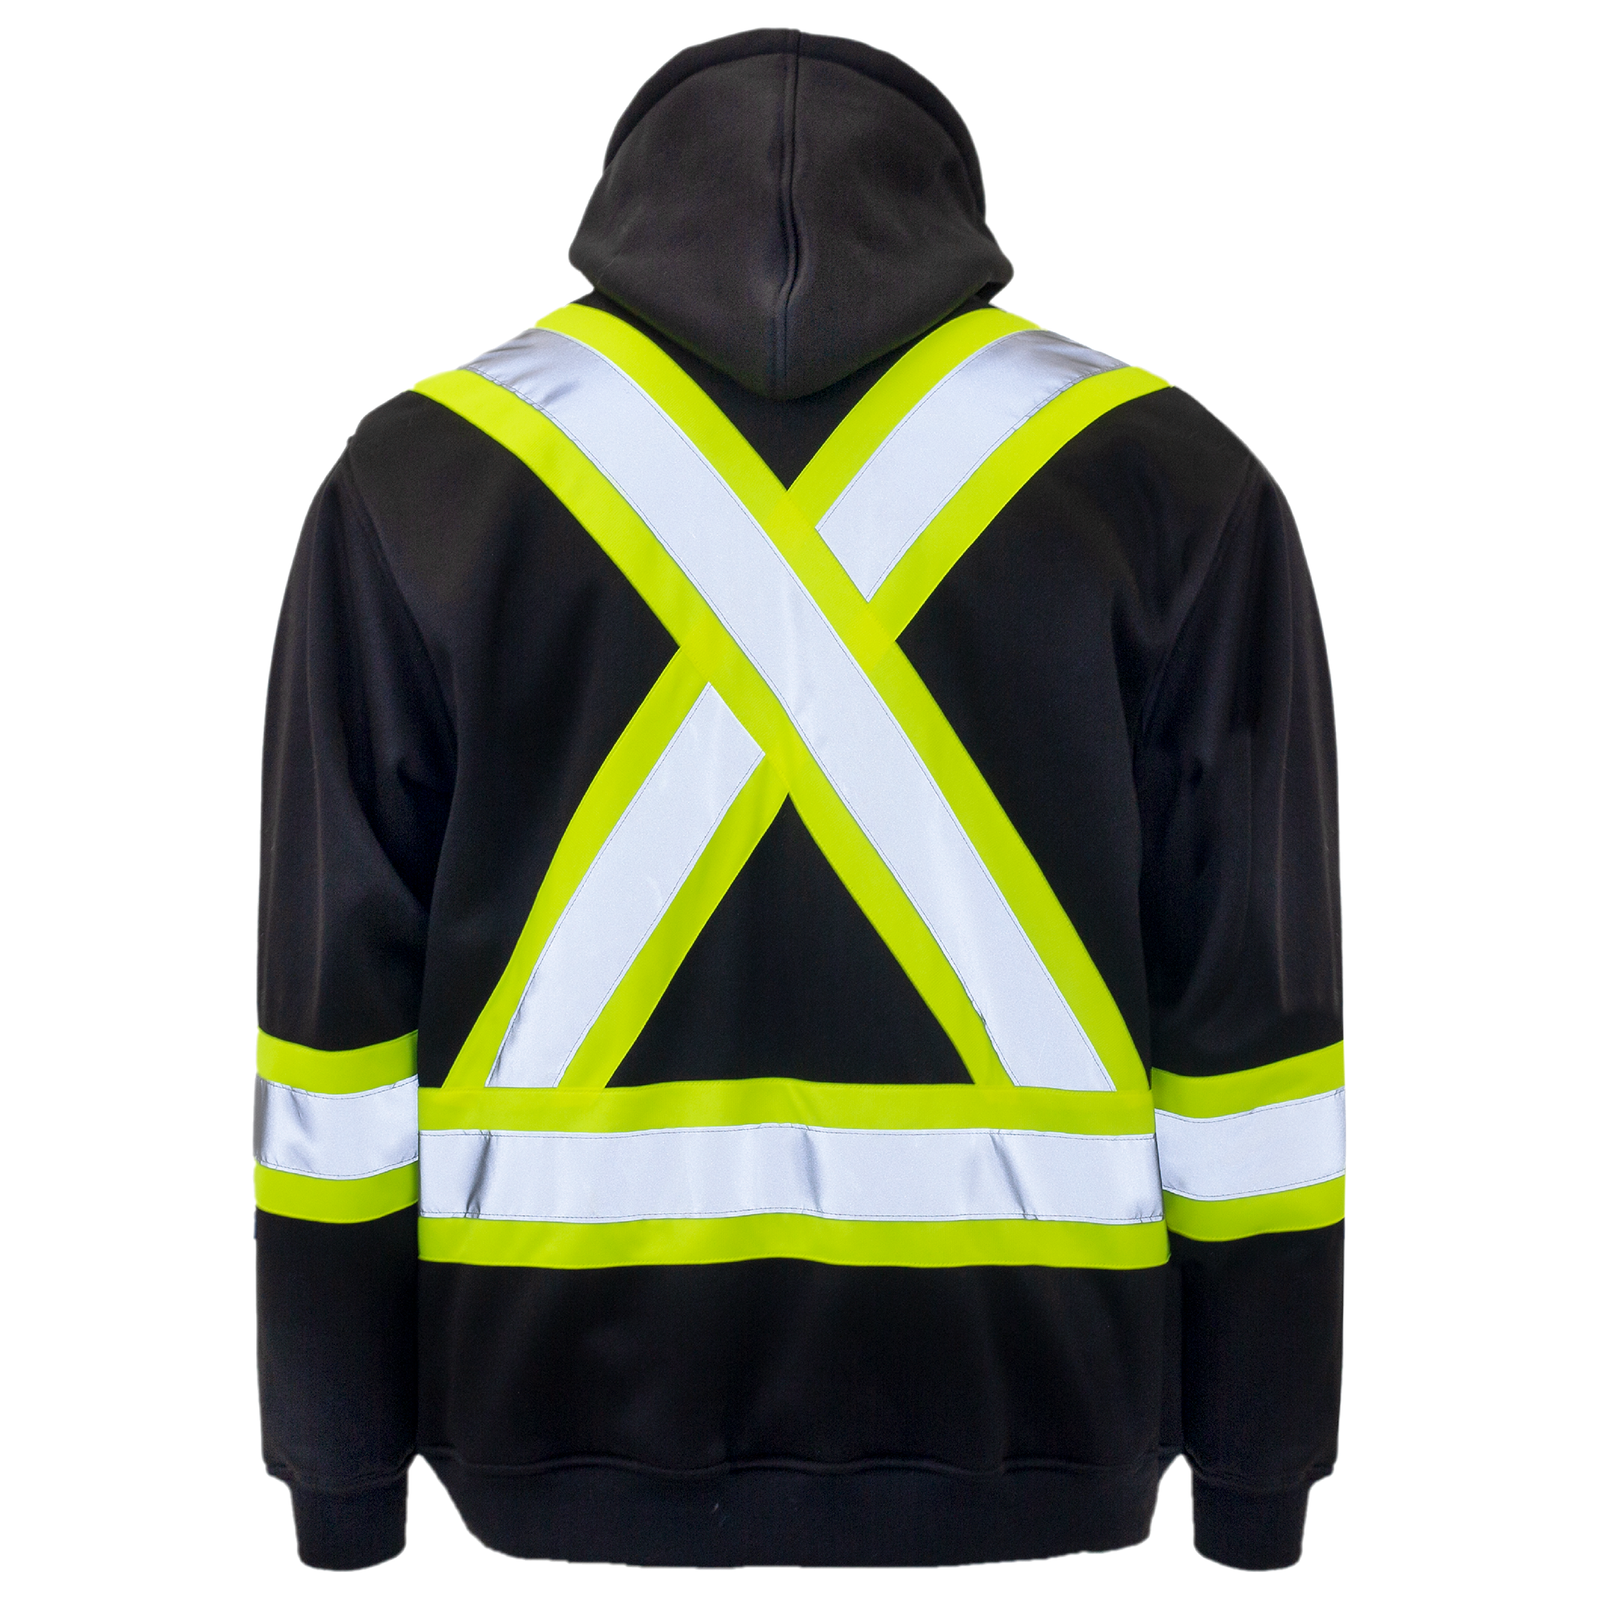 Black high visibility safety hooded sweater with reflective X on back